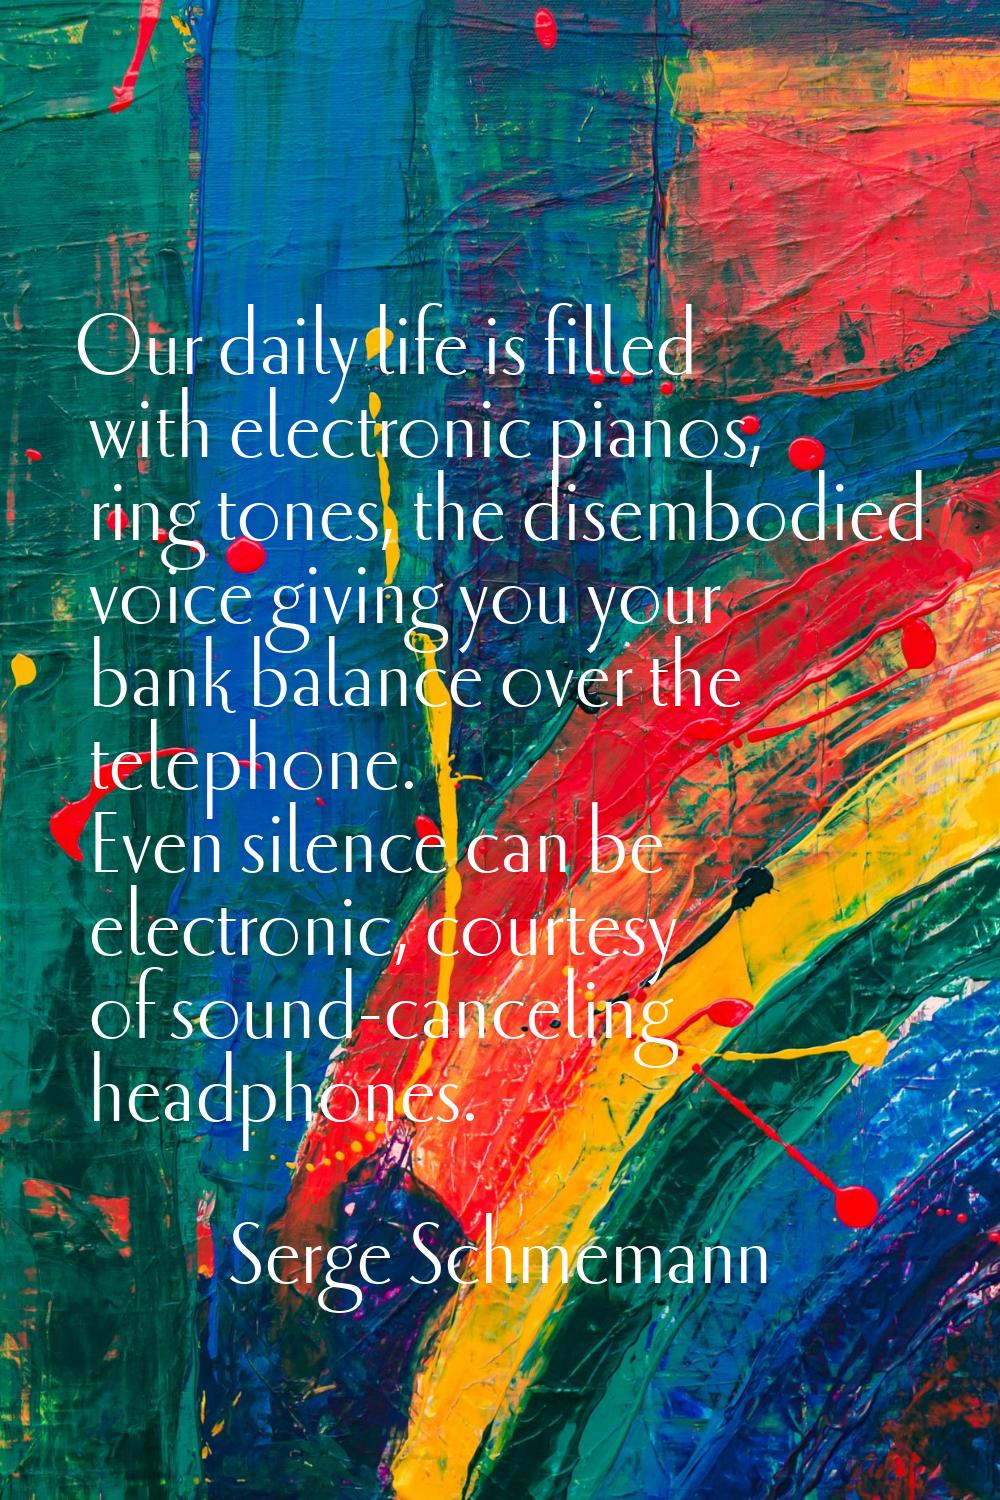 Our daily life is filled with electronic pianos, ring tones, the disembodied voice giving you your 